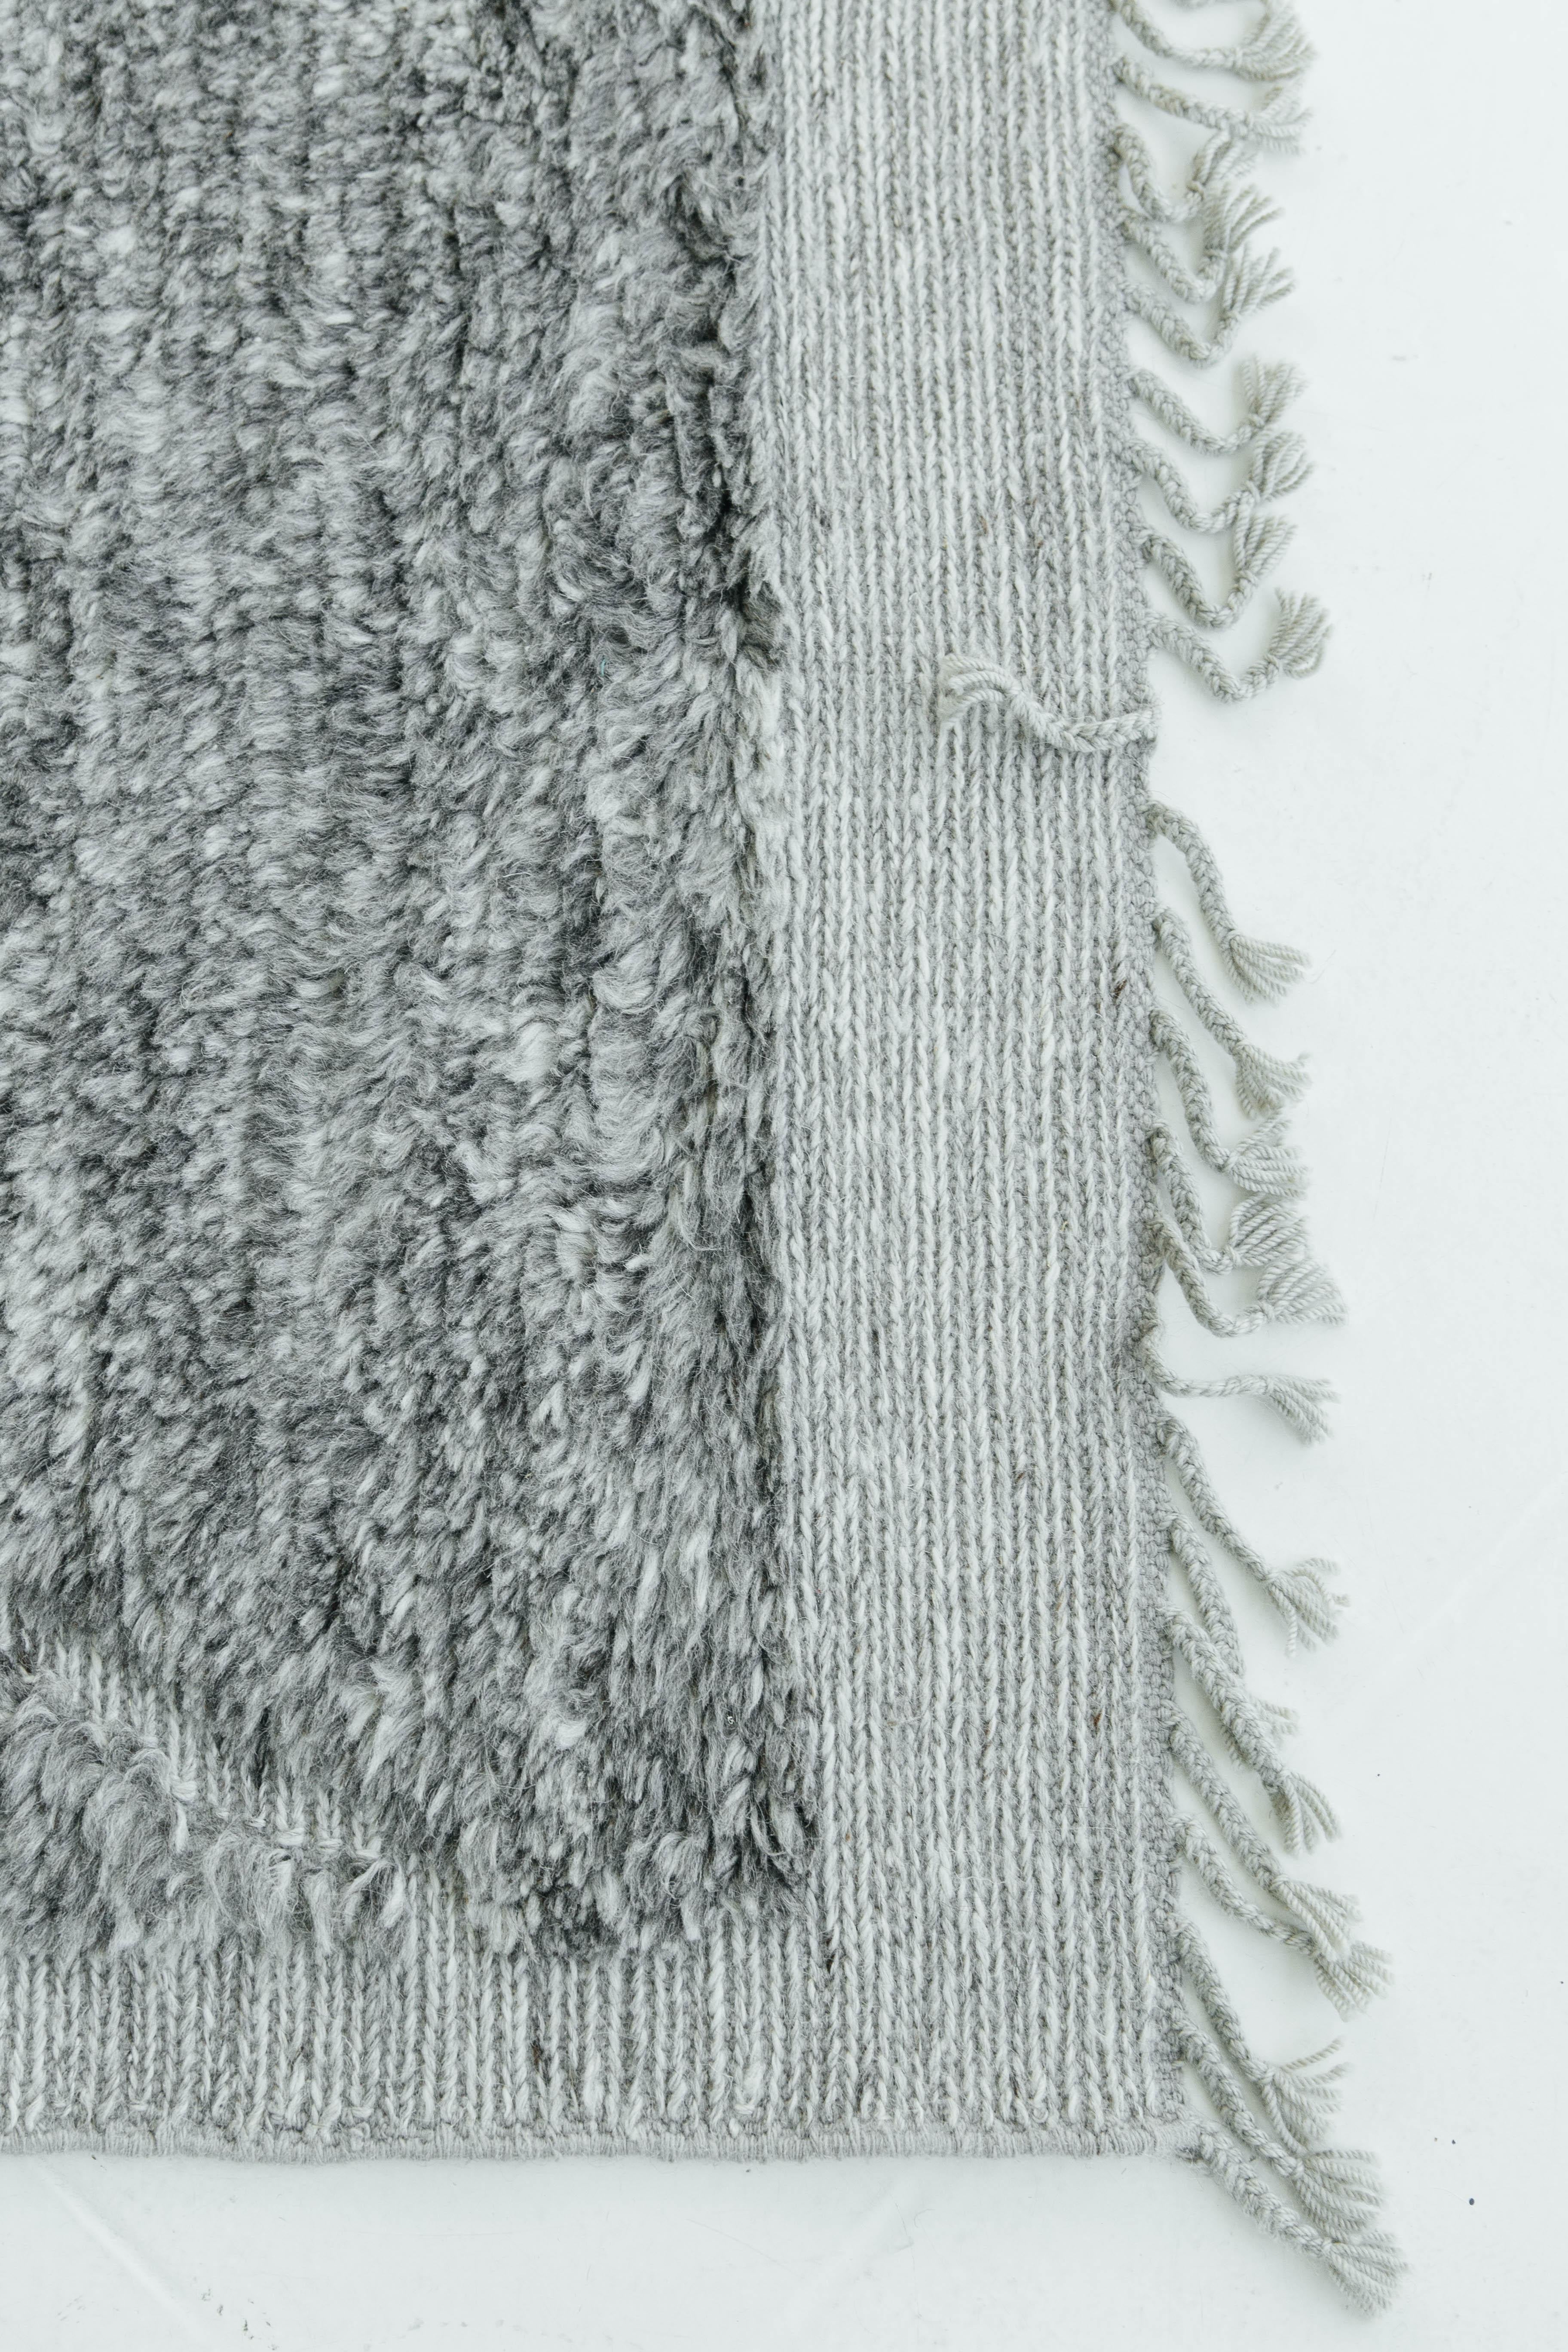 Handwoven of luxurious wool in the perfect shade of pewter with embossed detailing over a natural light-gray flat-weave, this design is a contemporary interpretation of a Moroccan tribal rug recreated for the modern design world. Tunner was crafted